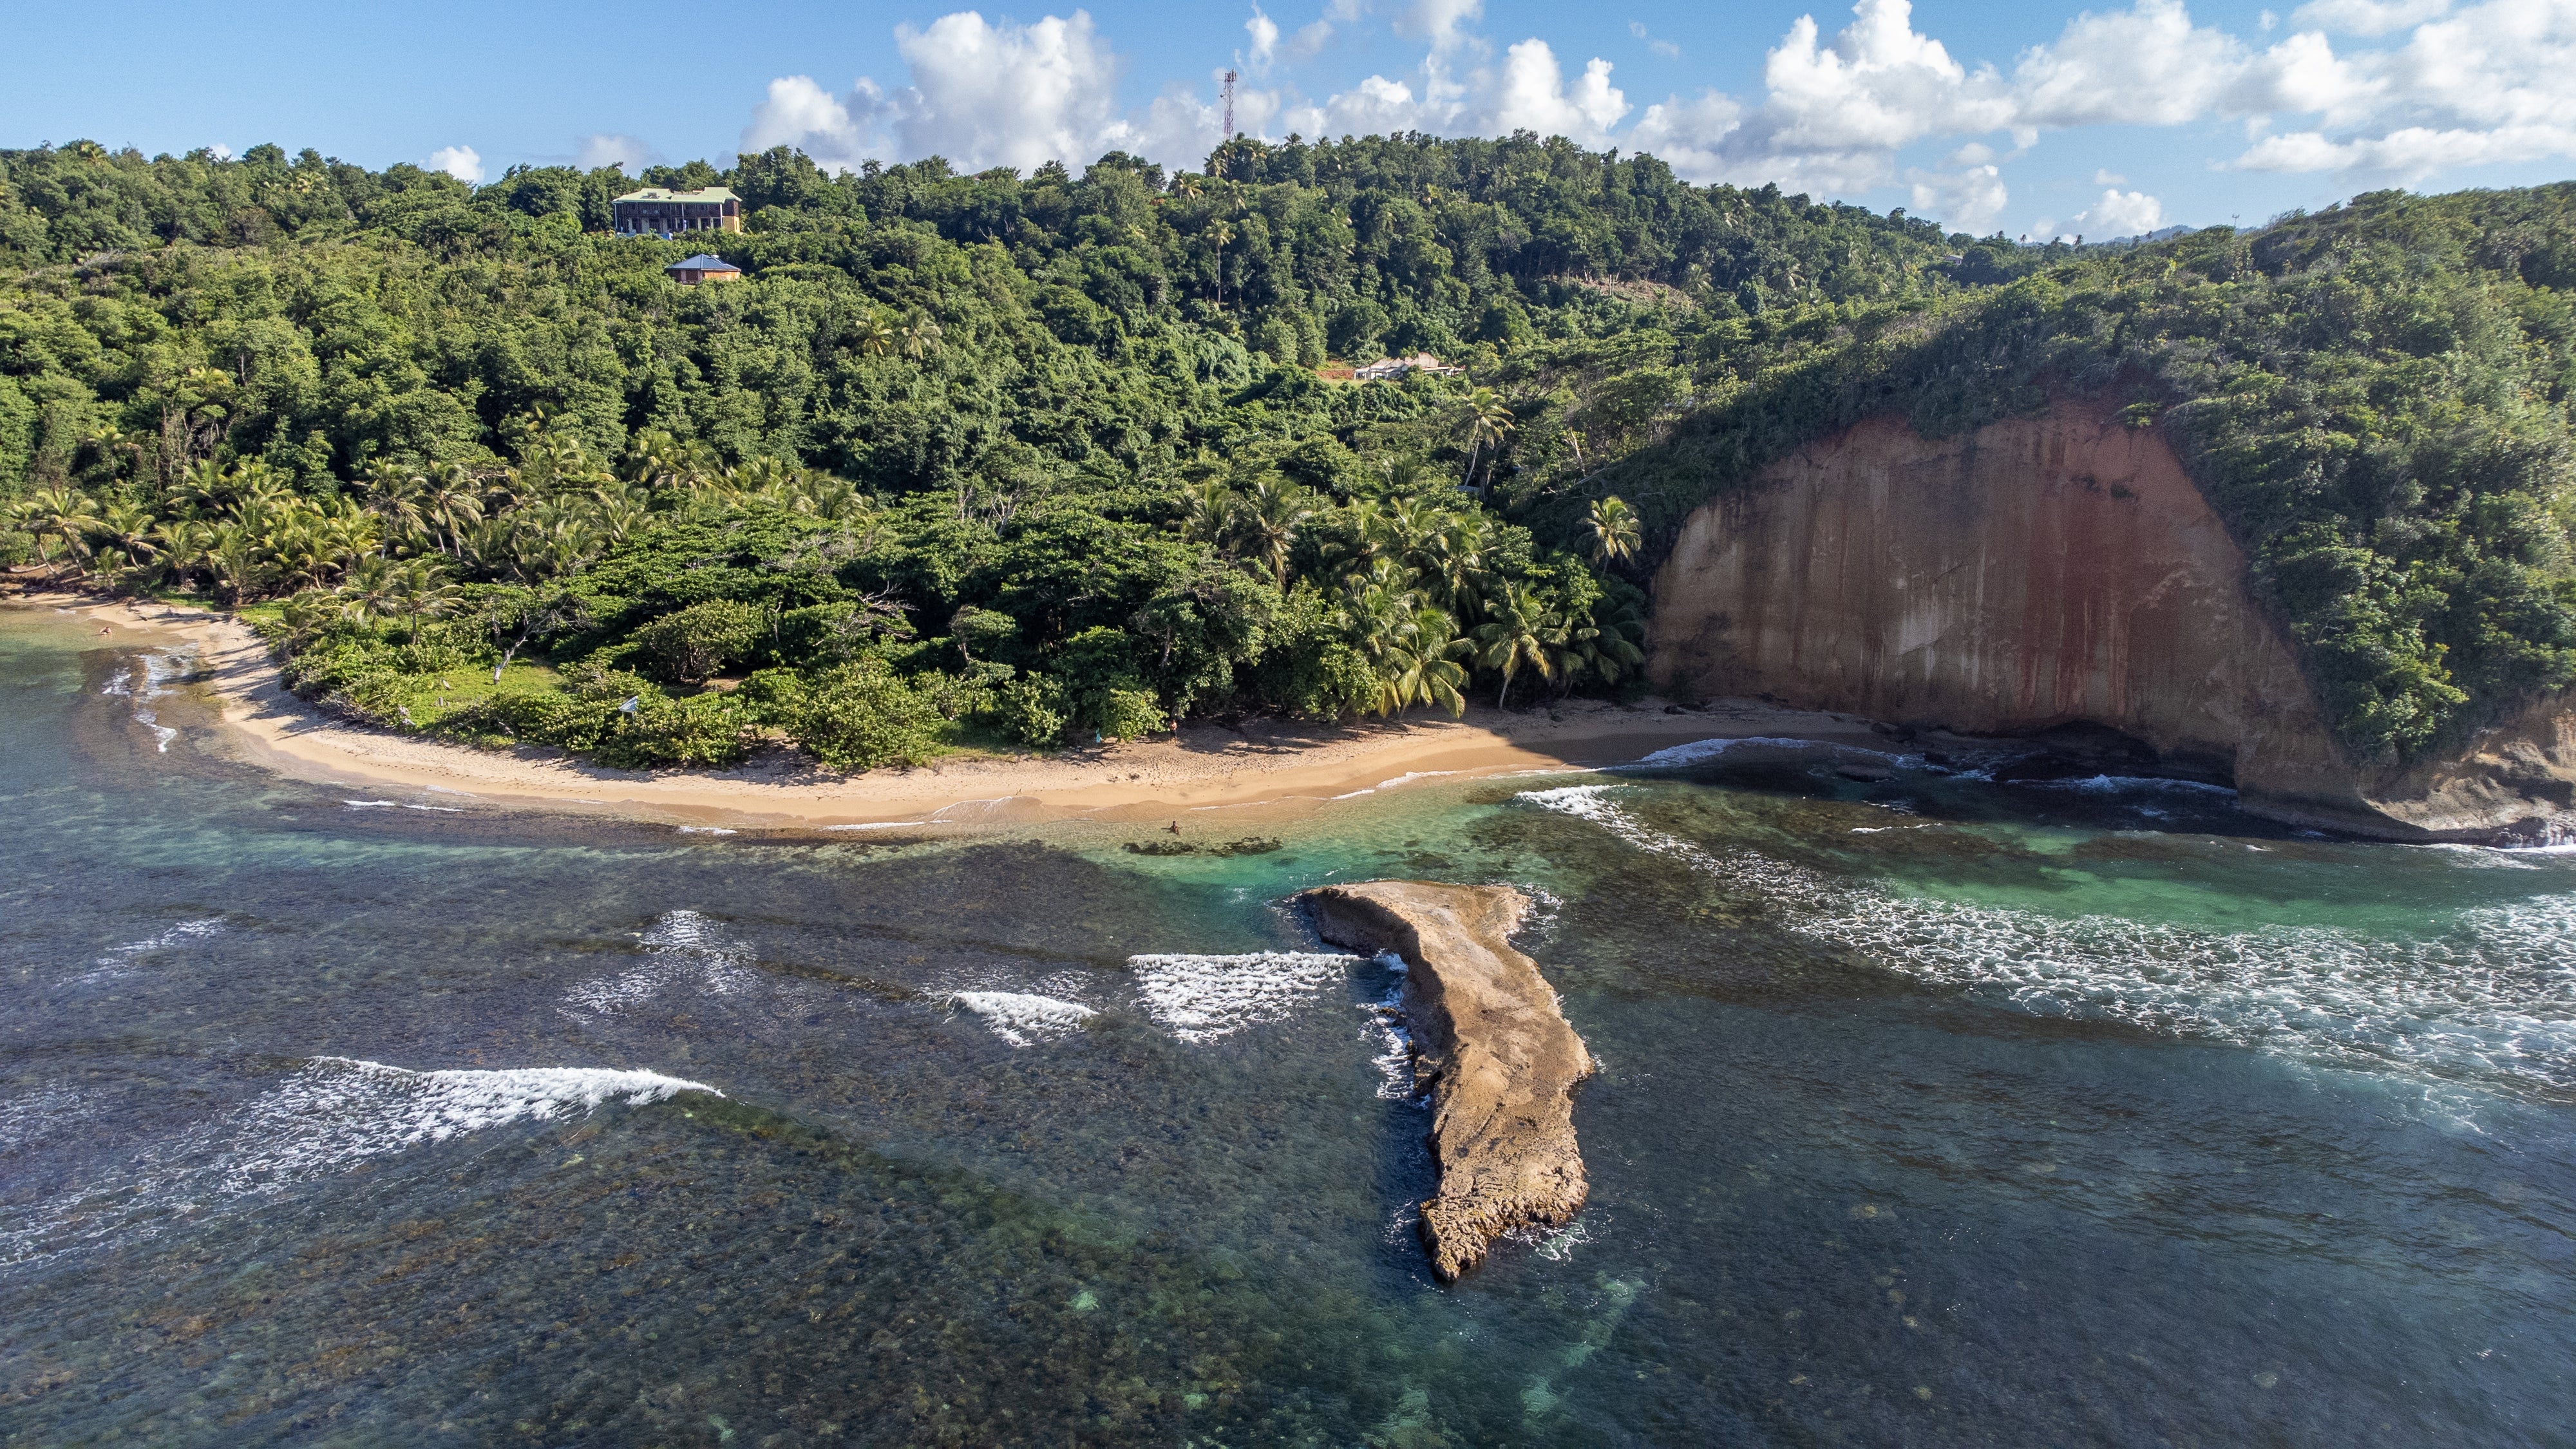 Dominica made the cut for its lush scenery